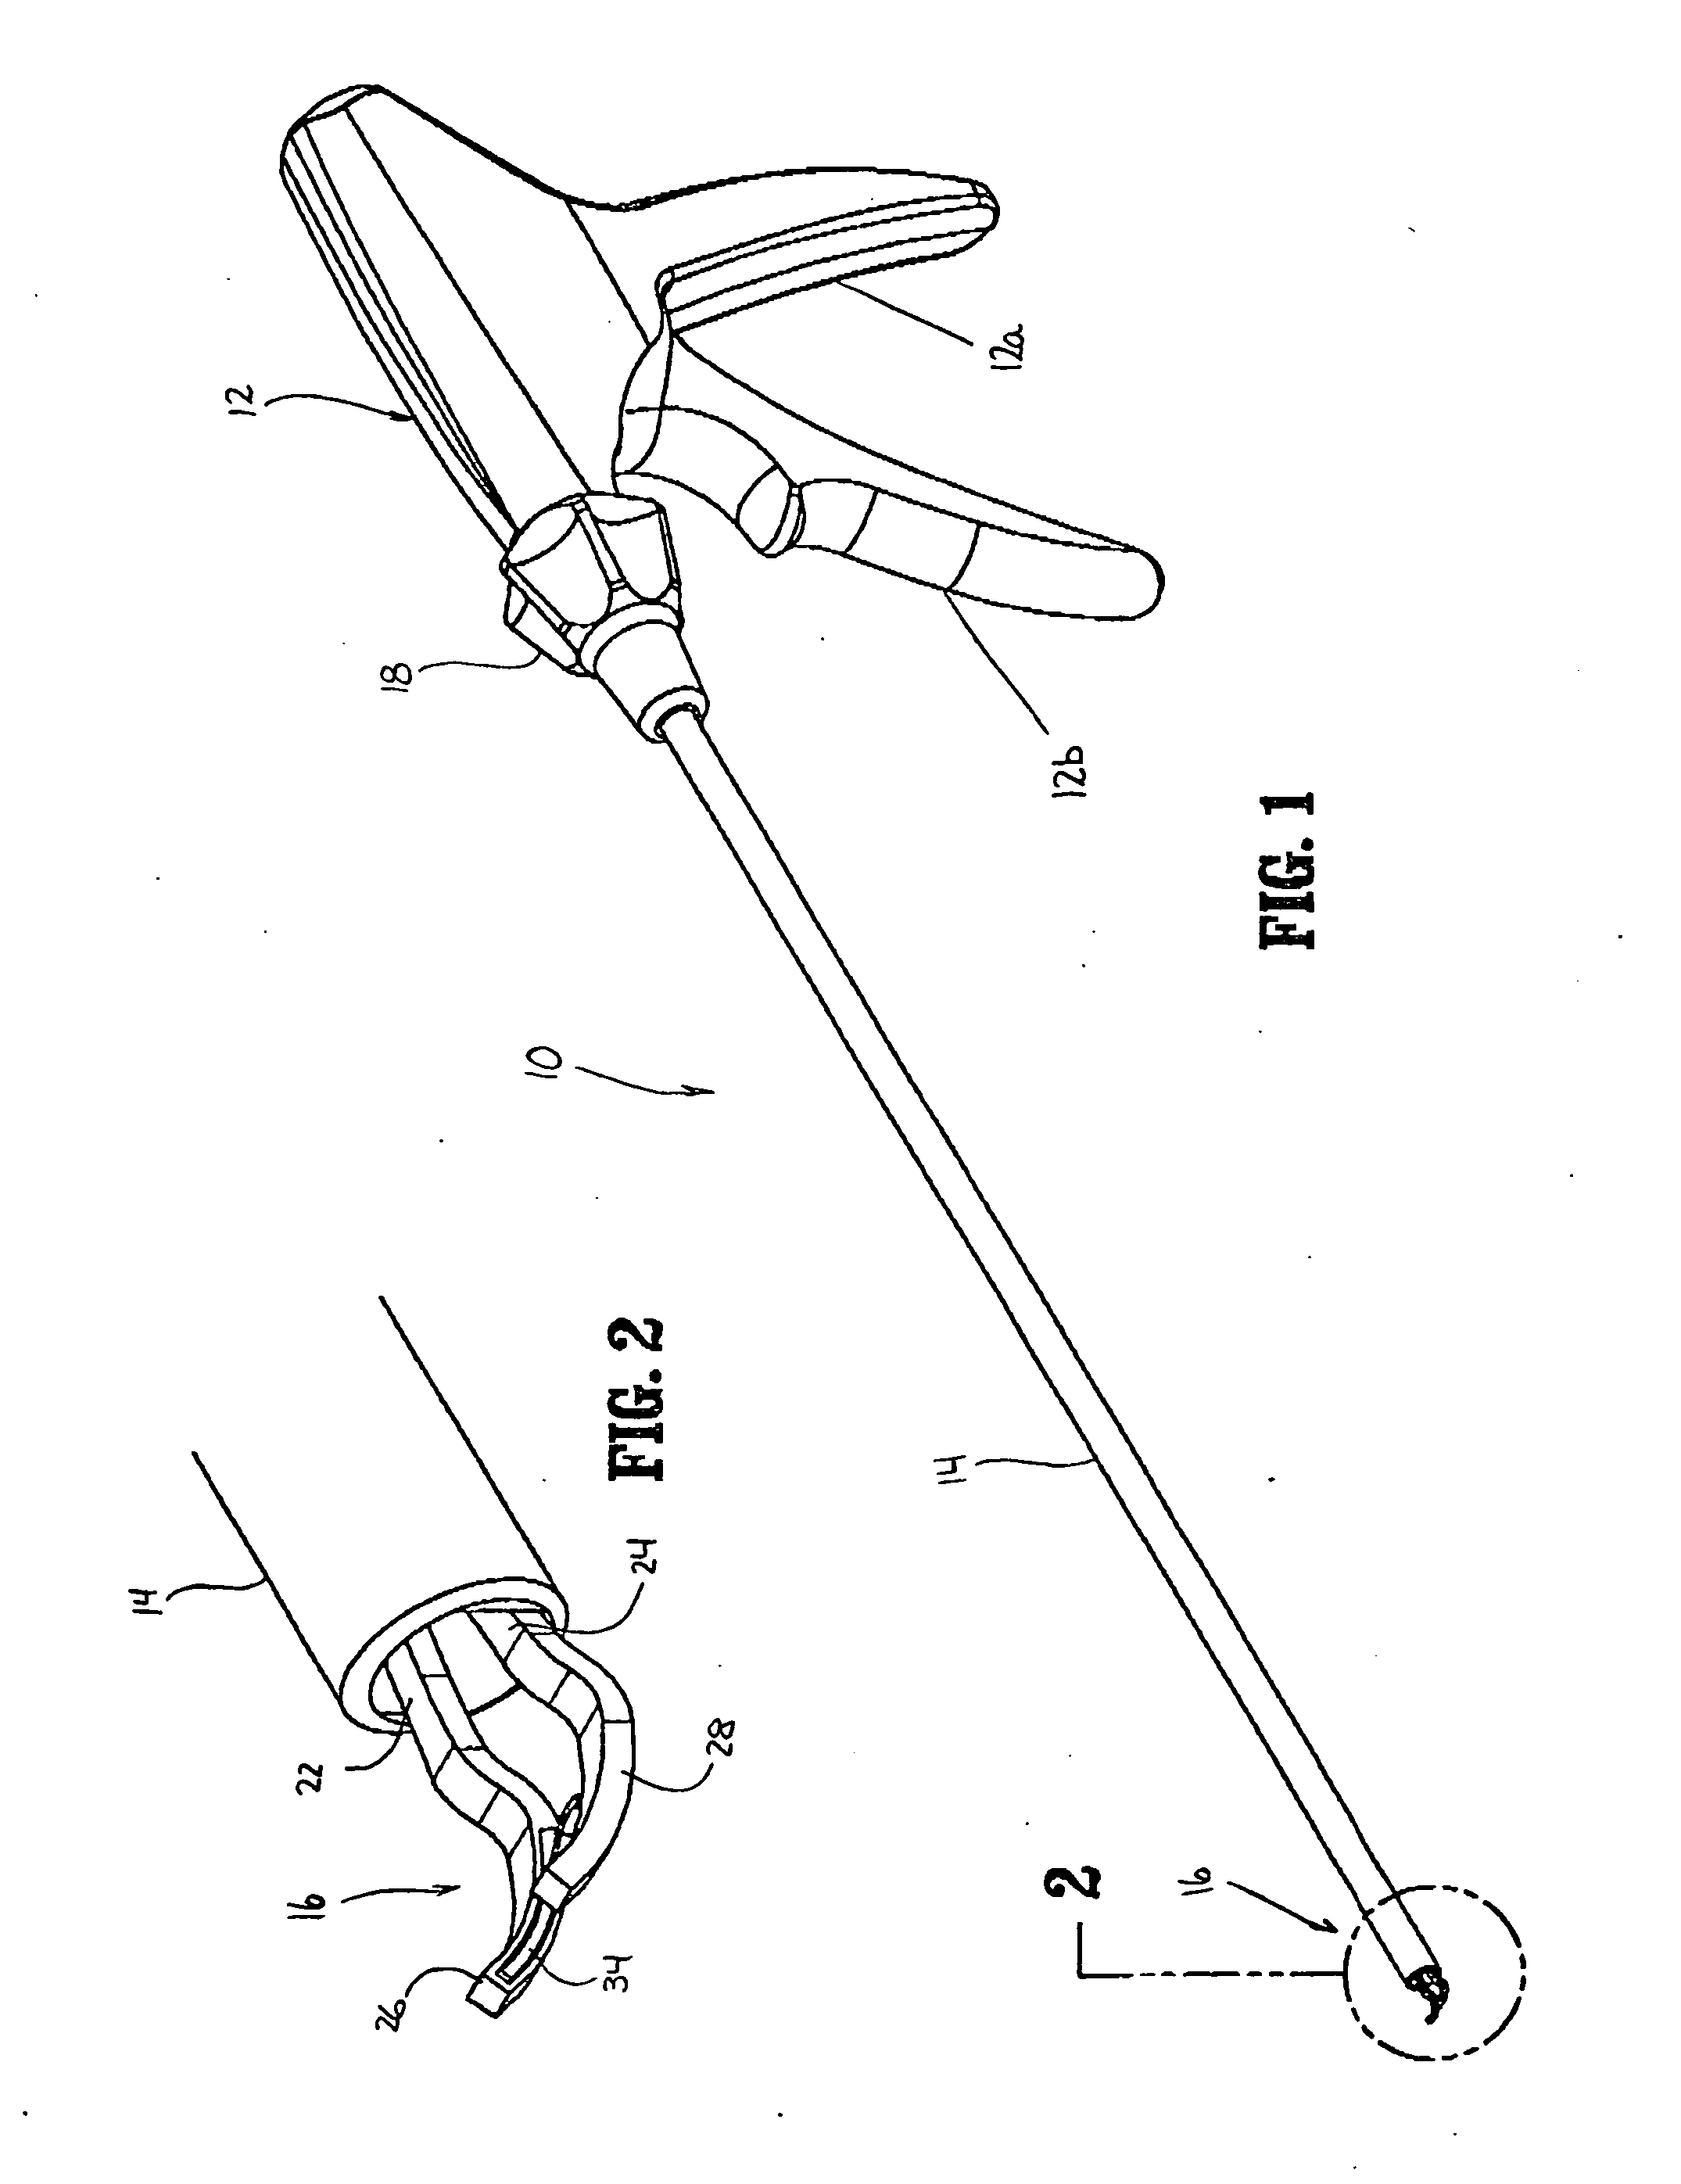 Clip applying apparatus with curved jaws, and clip